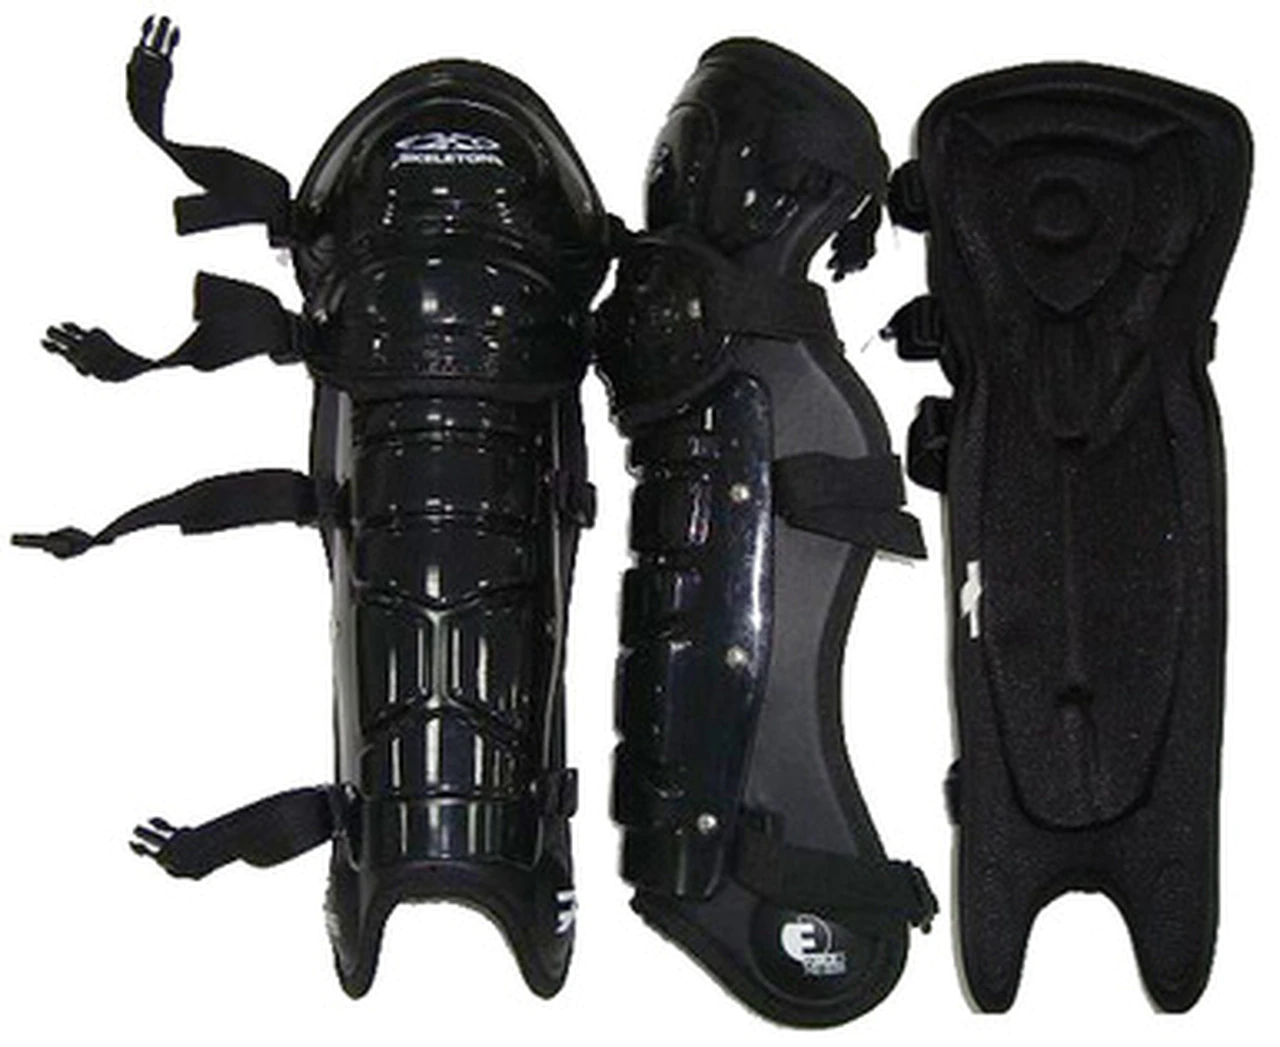 Force3 Ultimate Umpire Shin Guards